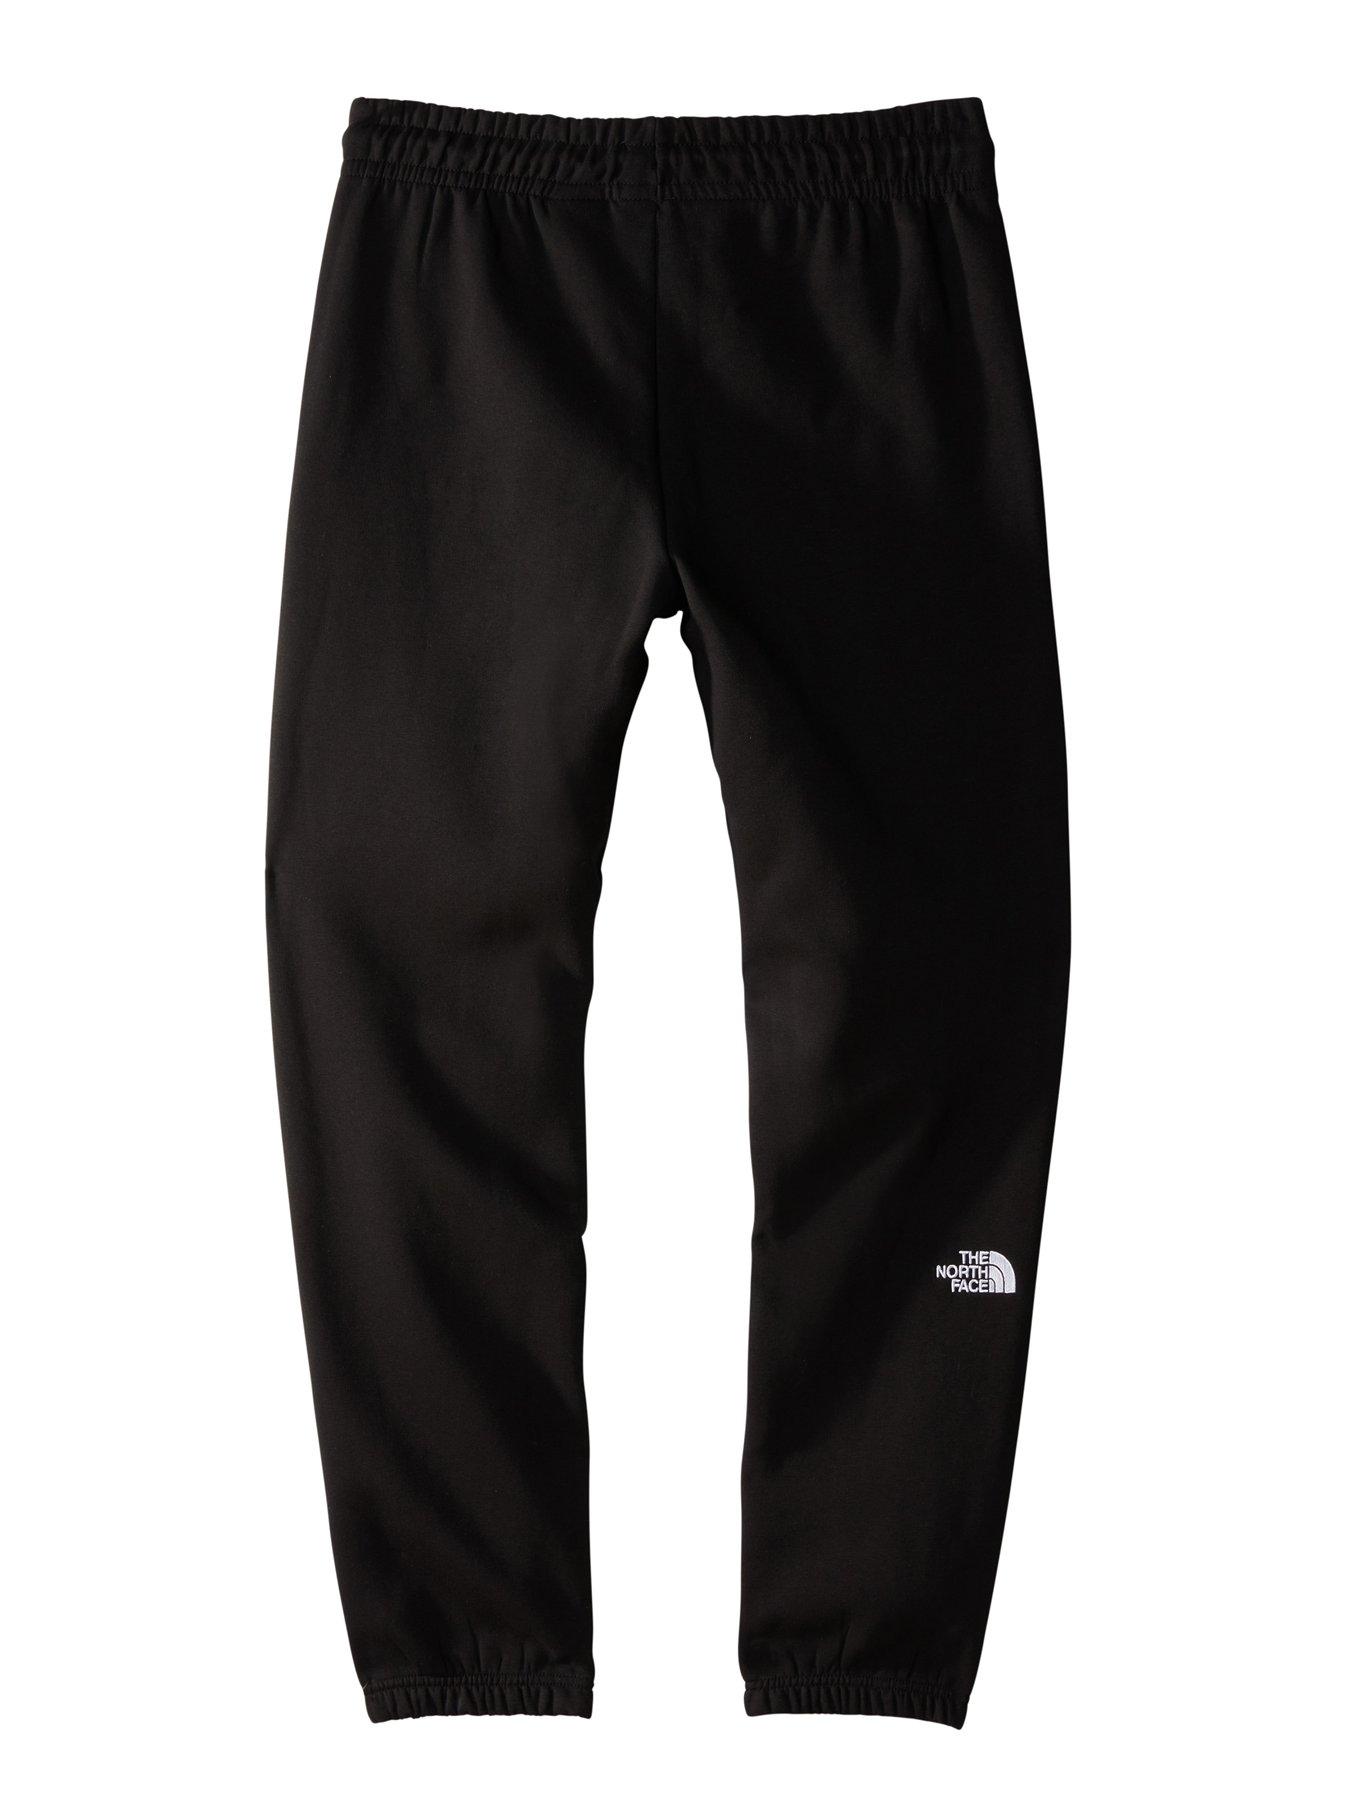 THE NORTH FACE Women's Essential Jogger - Black